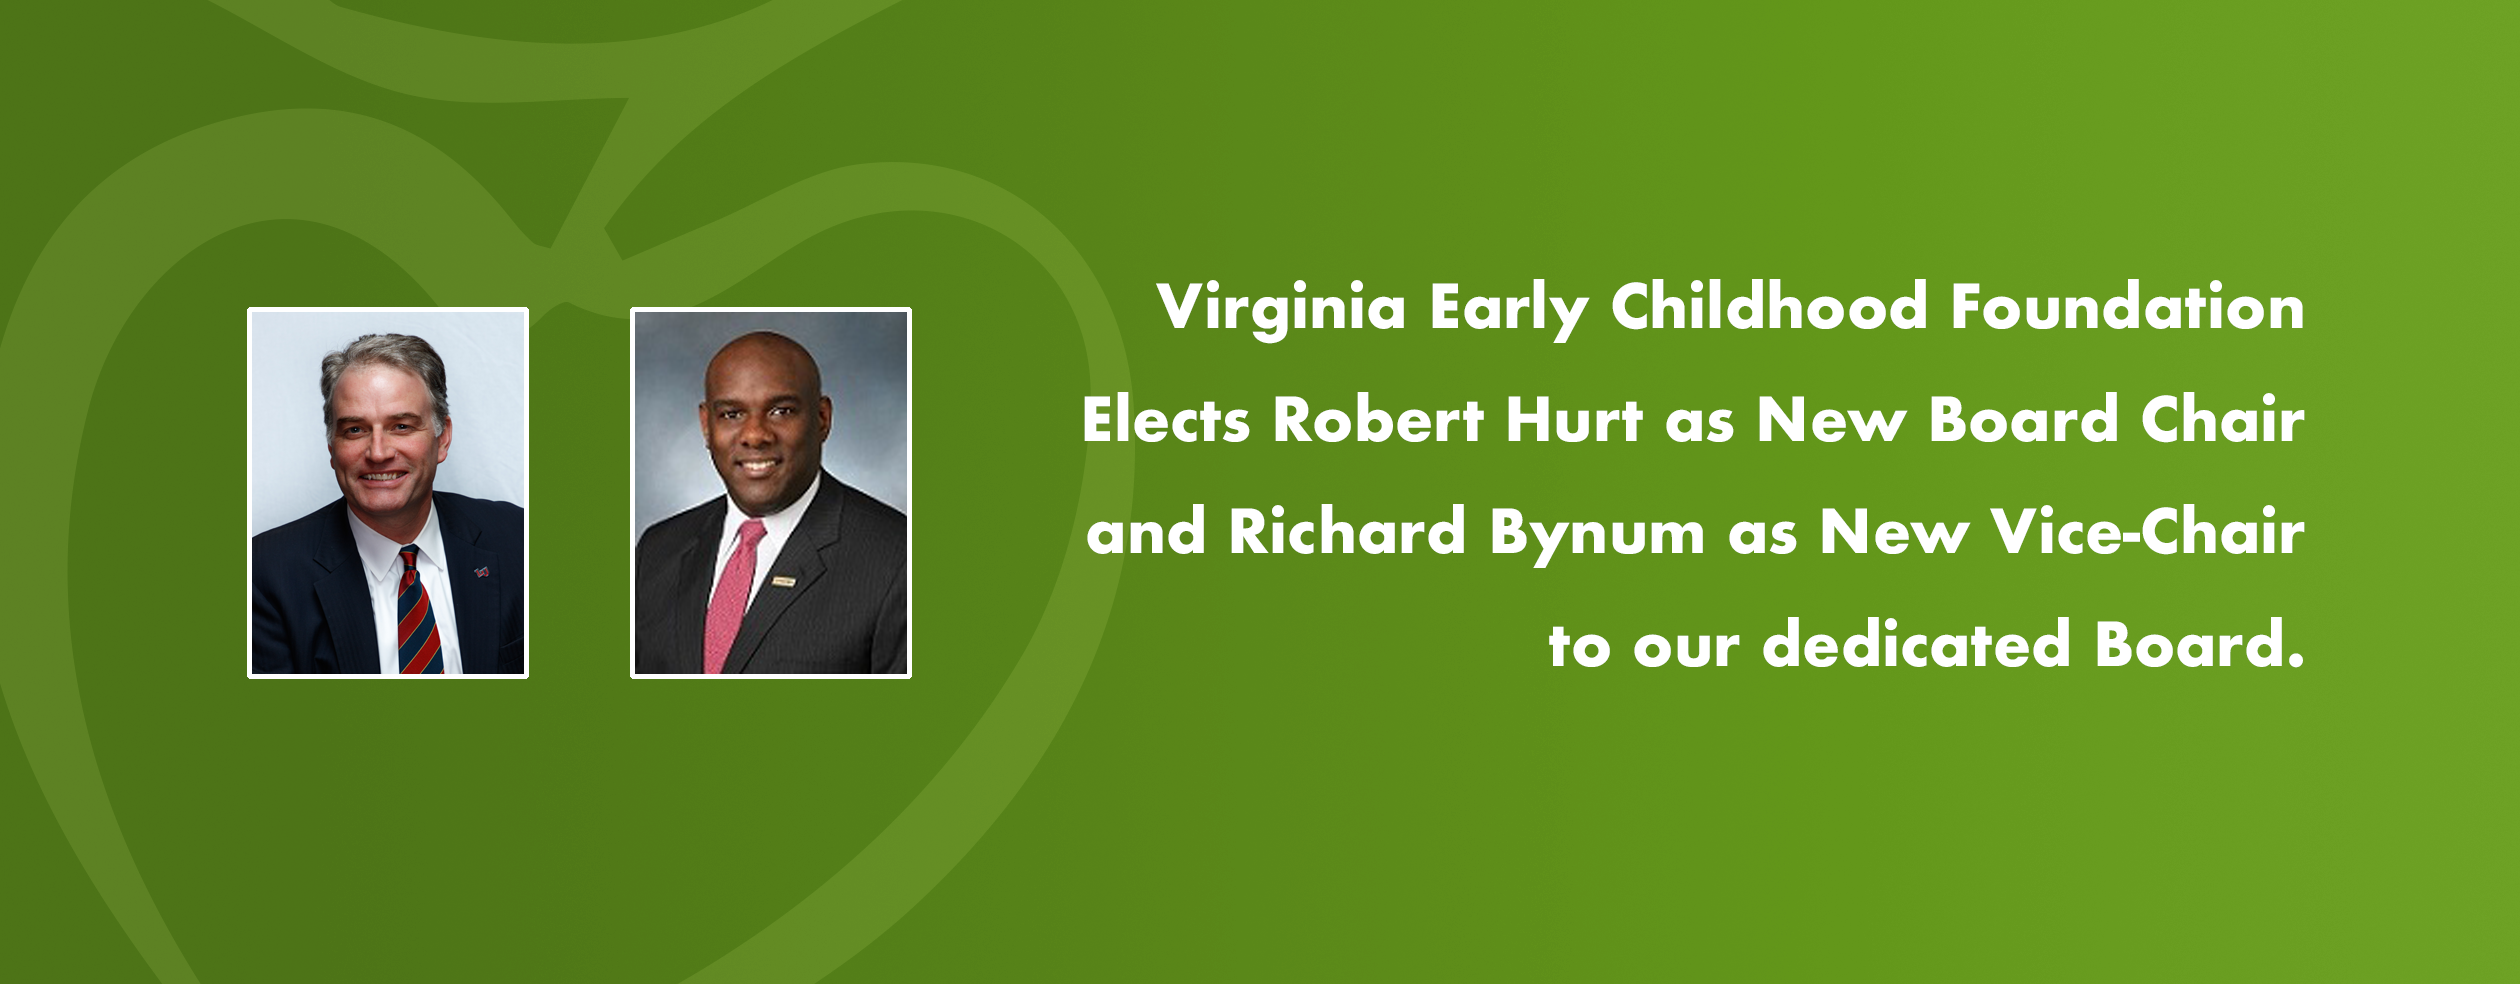 Virginia Early Childhood Foundation Elects New Board Chair and Vice-Chair